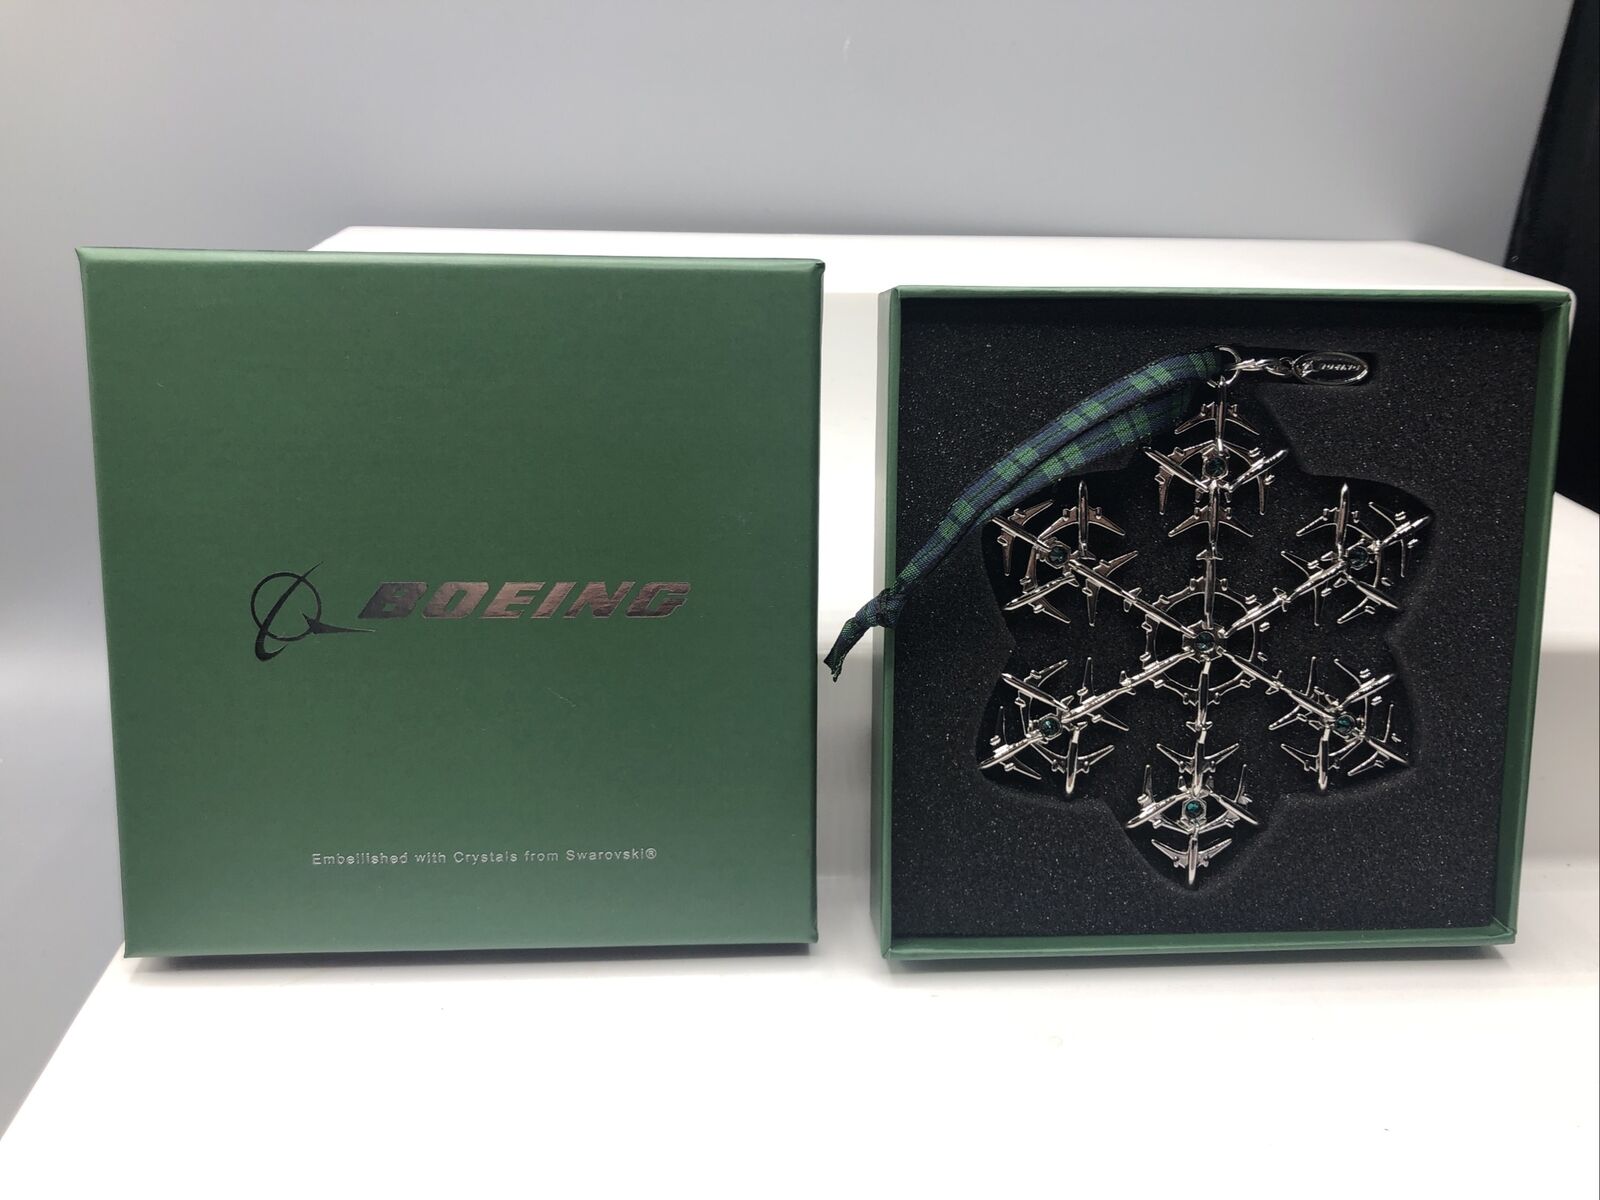 NEW BOEING 2020 Jet Snowflake with Green Swarovski Crystals Christmas Ornament